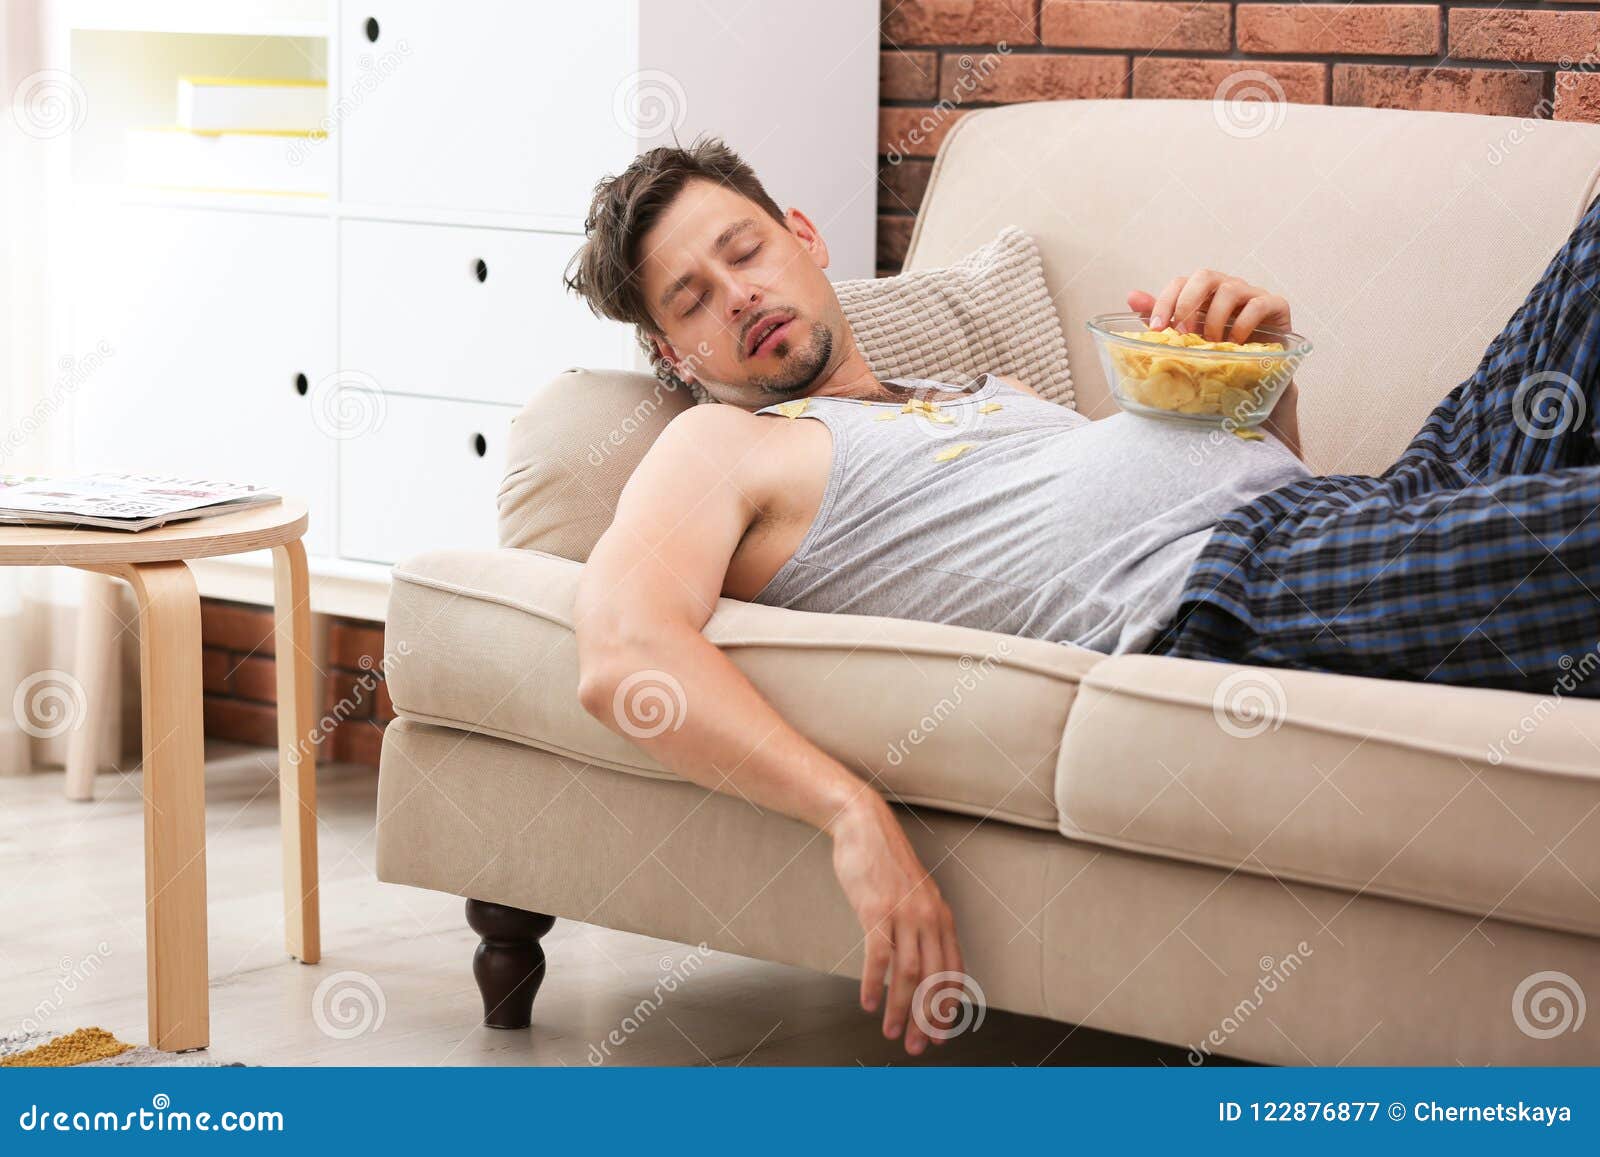 lazy man with bowl of chips sleeping on sofa